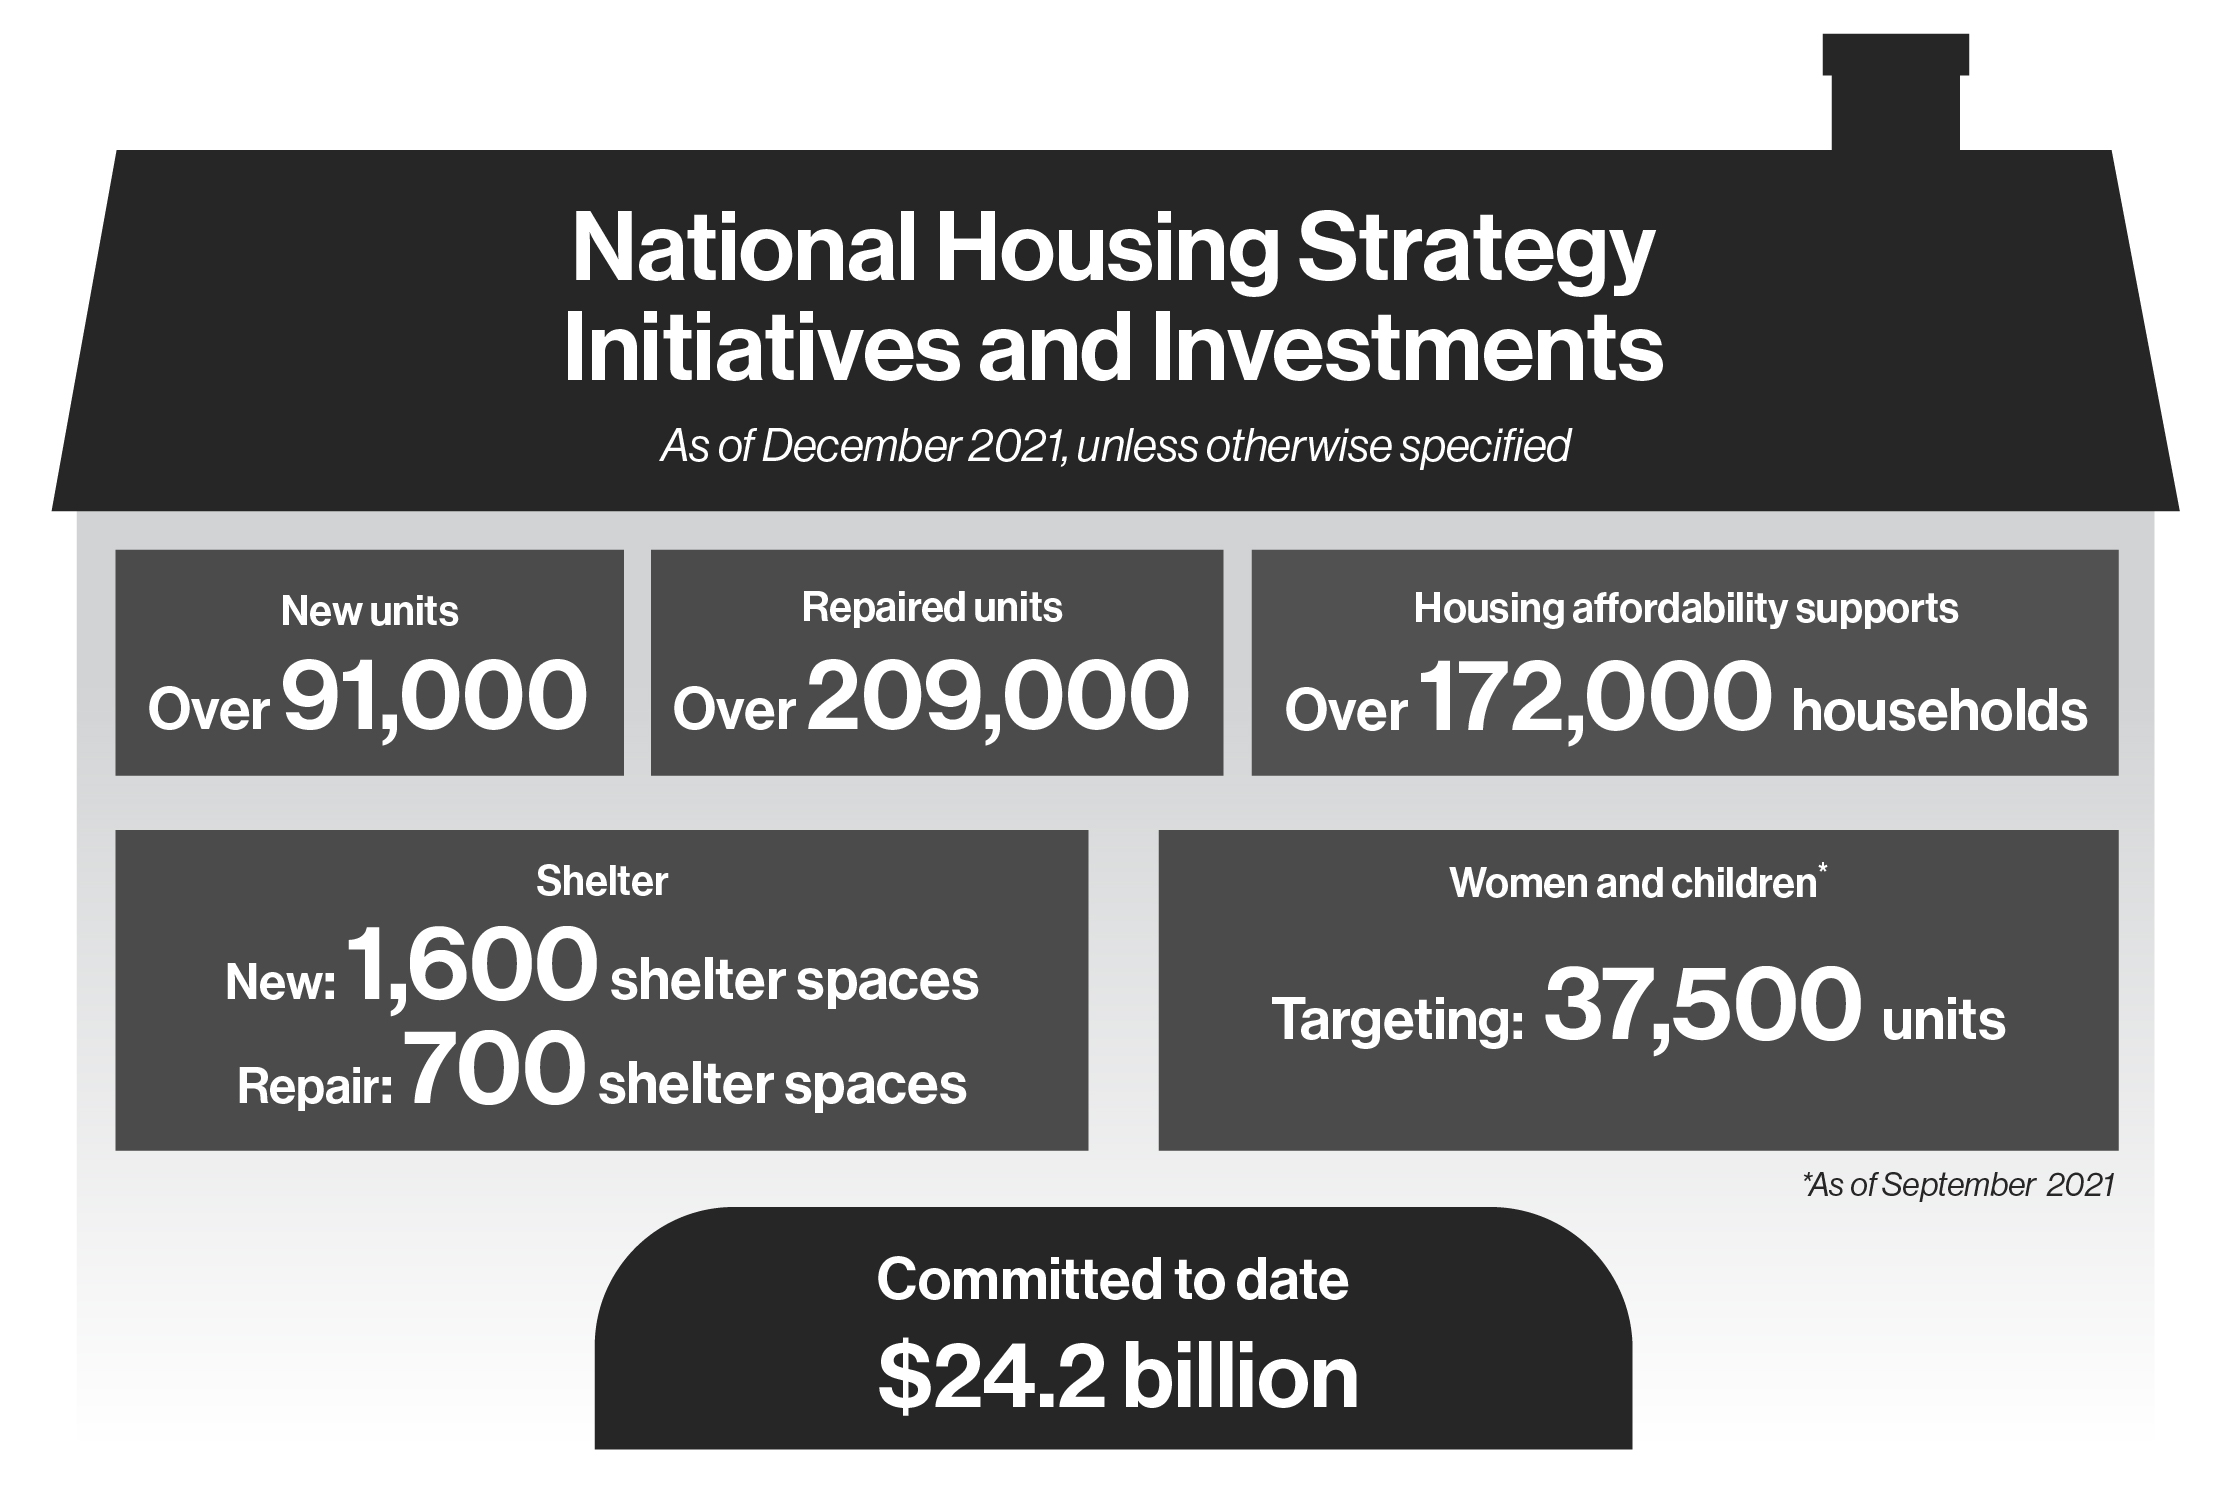 Figure 1.1: National Housing Strategy Initiatives and Investments Committed